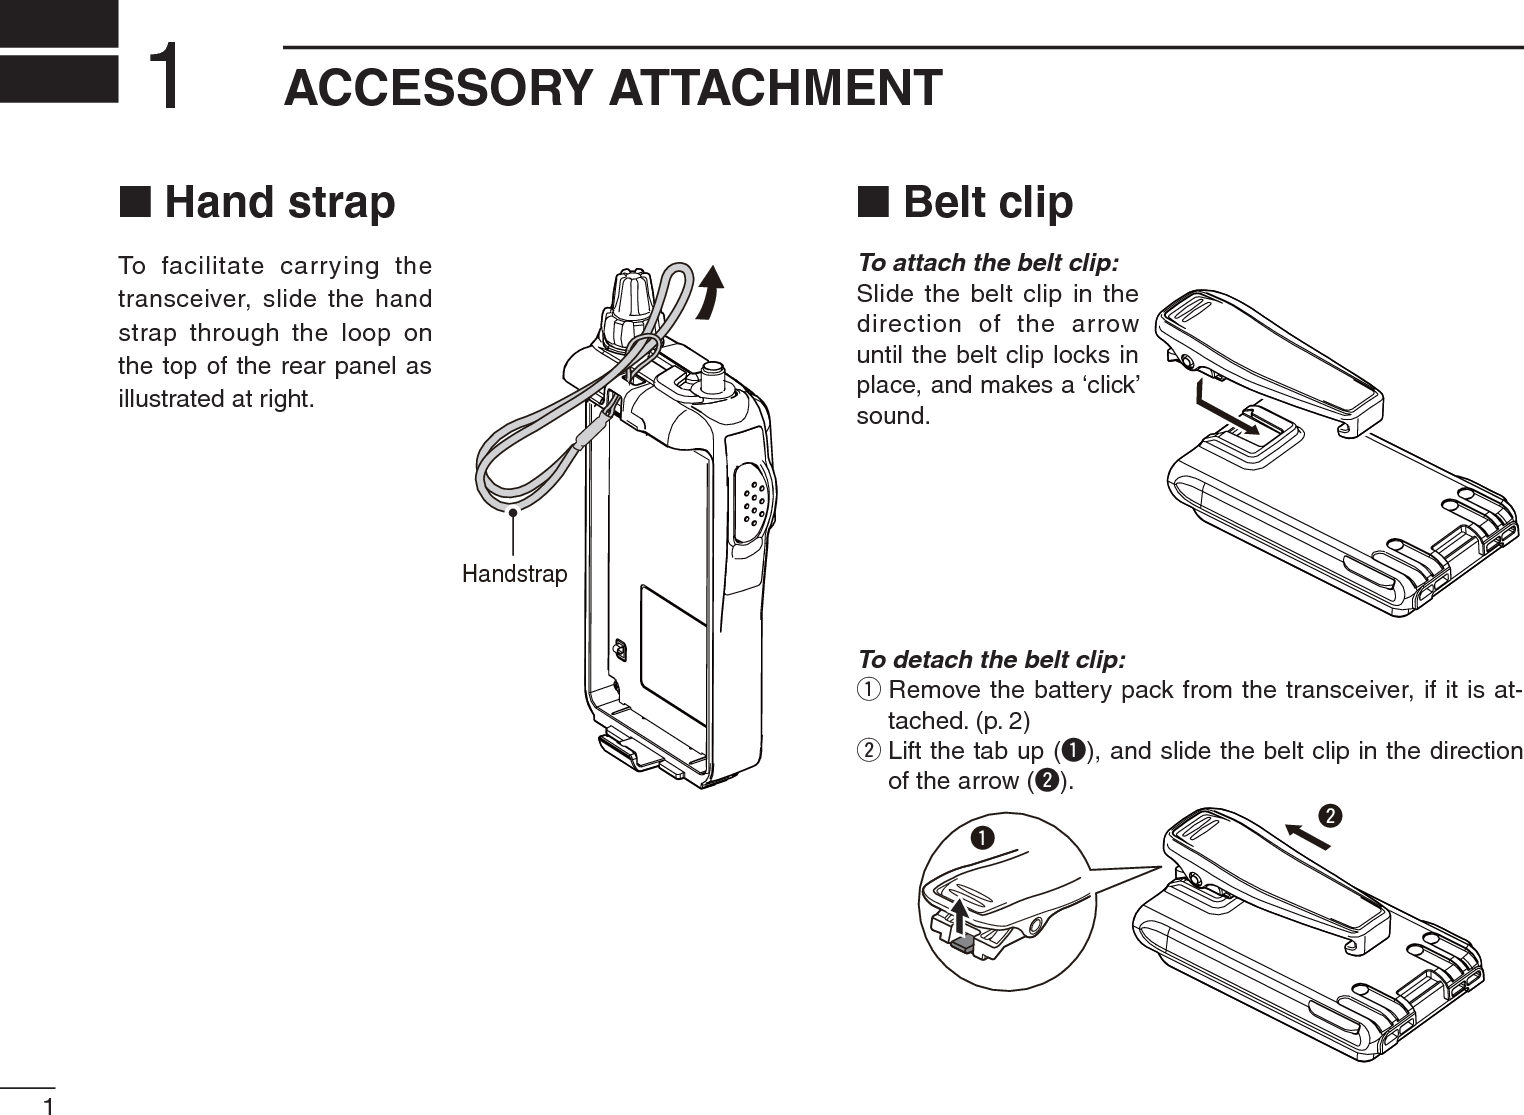 1ACCESSORY ATTACHMENT1N Hand strapTo facilitate carrying the transceiver, slide the hand strap through the loop on the top of the rear panel as illustrated at right.N Belt clipTo attach the belt clip:Slide the belt clip in the direction of the arrow until the belt clip locks in place, and makes a ‘click’ sound.To detach the belt clip:qRemove the battery pack from the transceiver, if it is at-tached. (p. 2)wLift the tab up (q), and slide the belt clip in the direction of the arrow (w).qwHandstrap